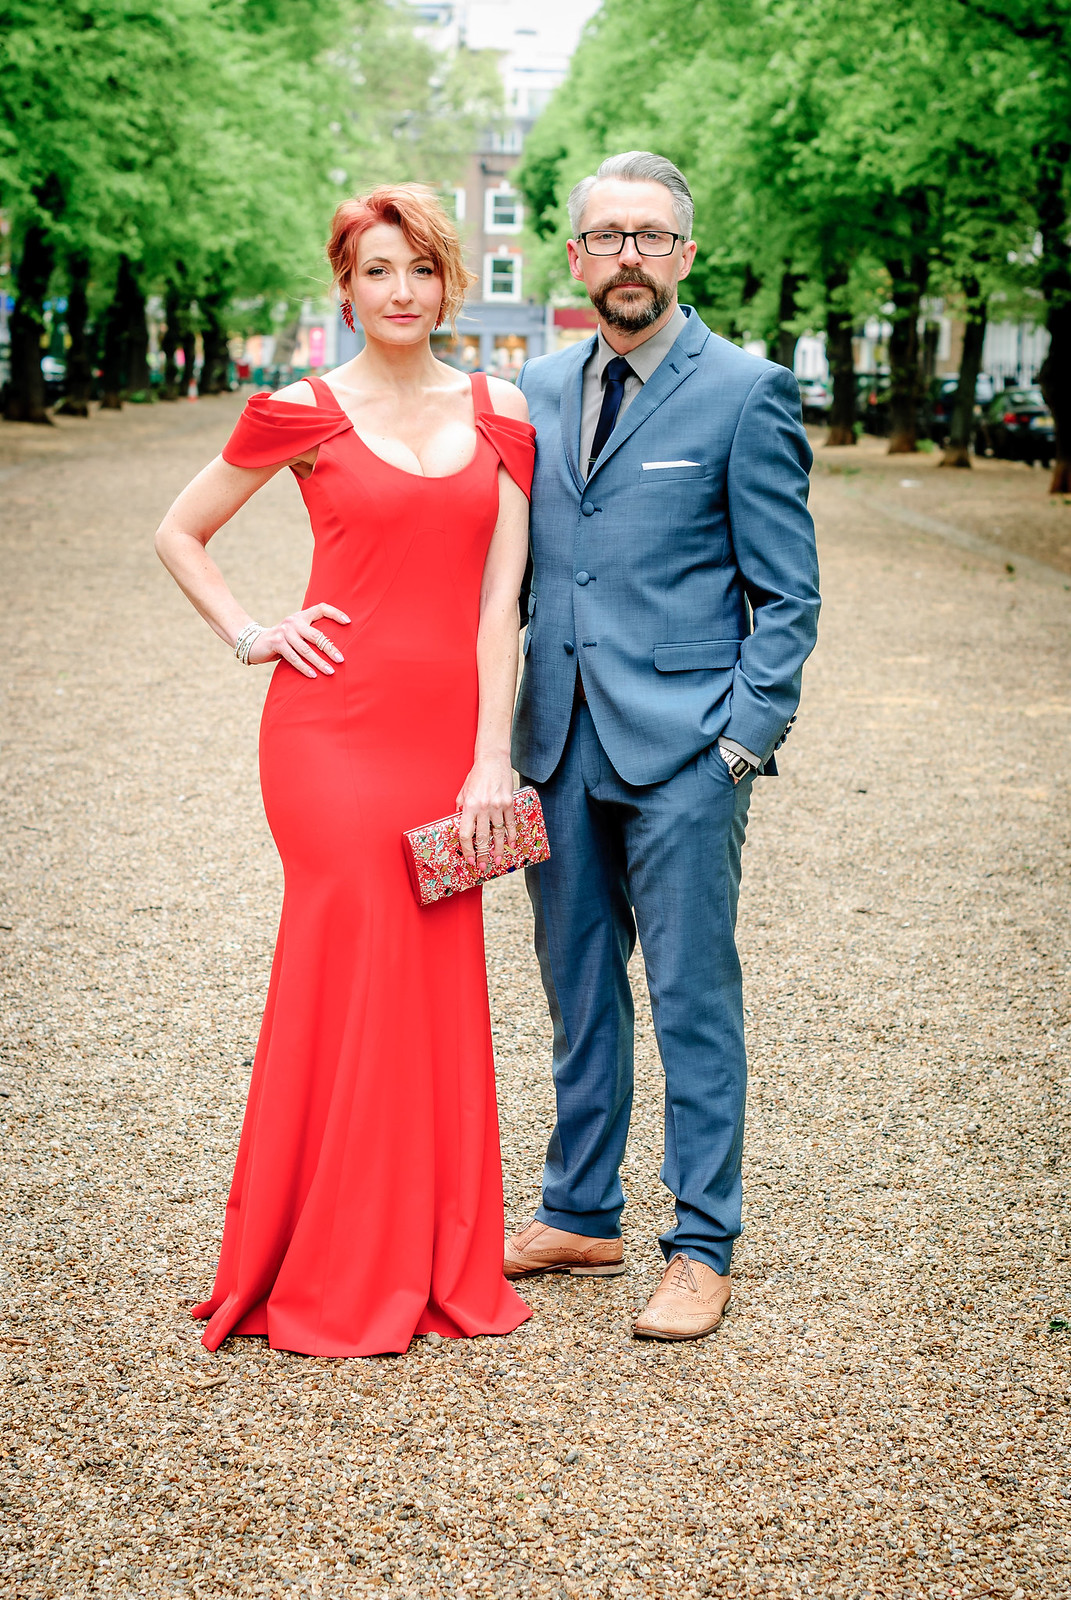 Awards ceremony outfit - Her: Long red fitted gown with shoulder detail \ Him: Mid blue suit with dark tie and tan brogues | Not Dressed As Lamb, over 40 style